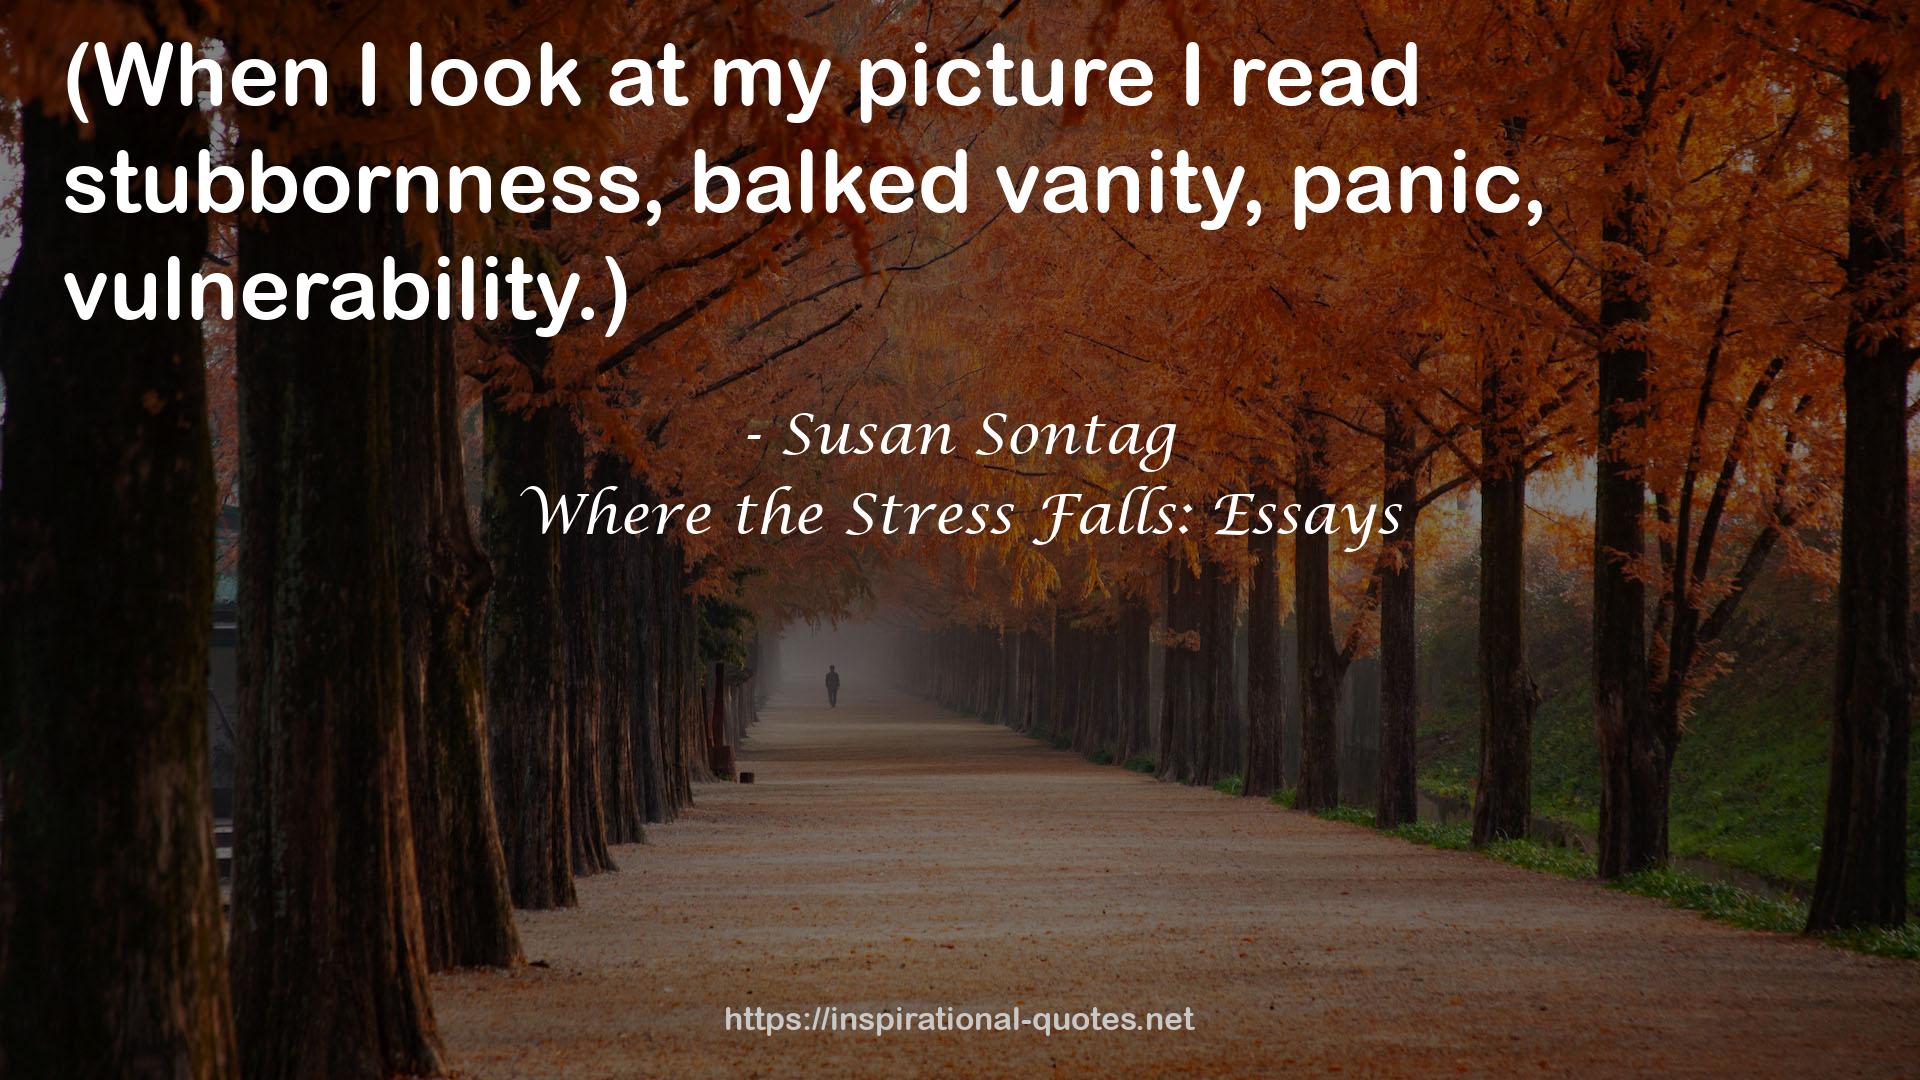 Where the Stress Falls: Essays QUOTES